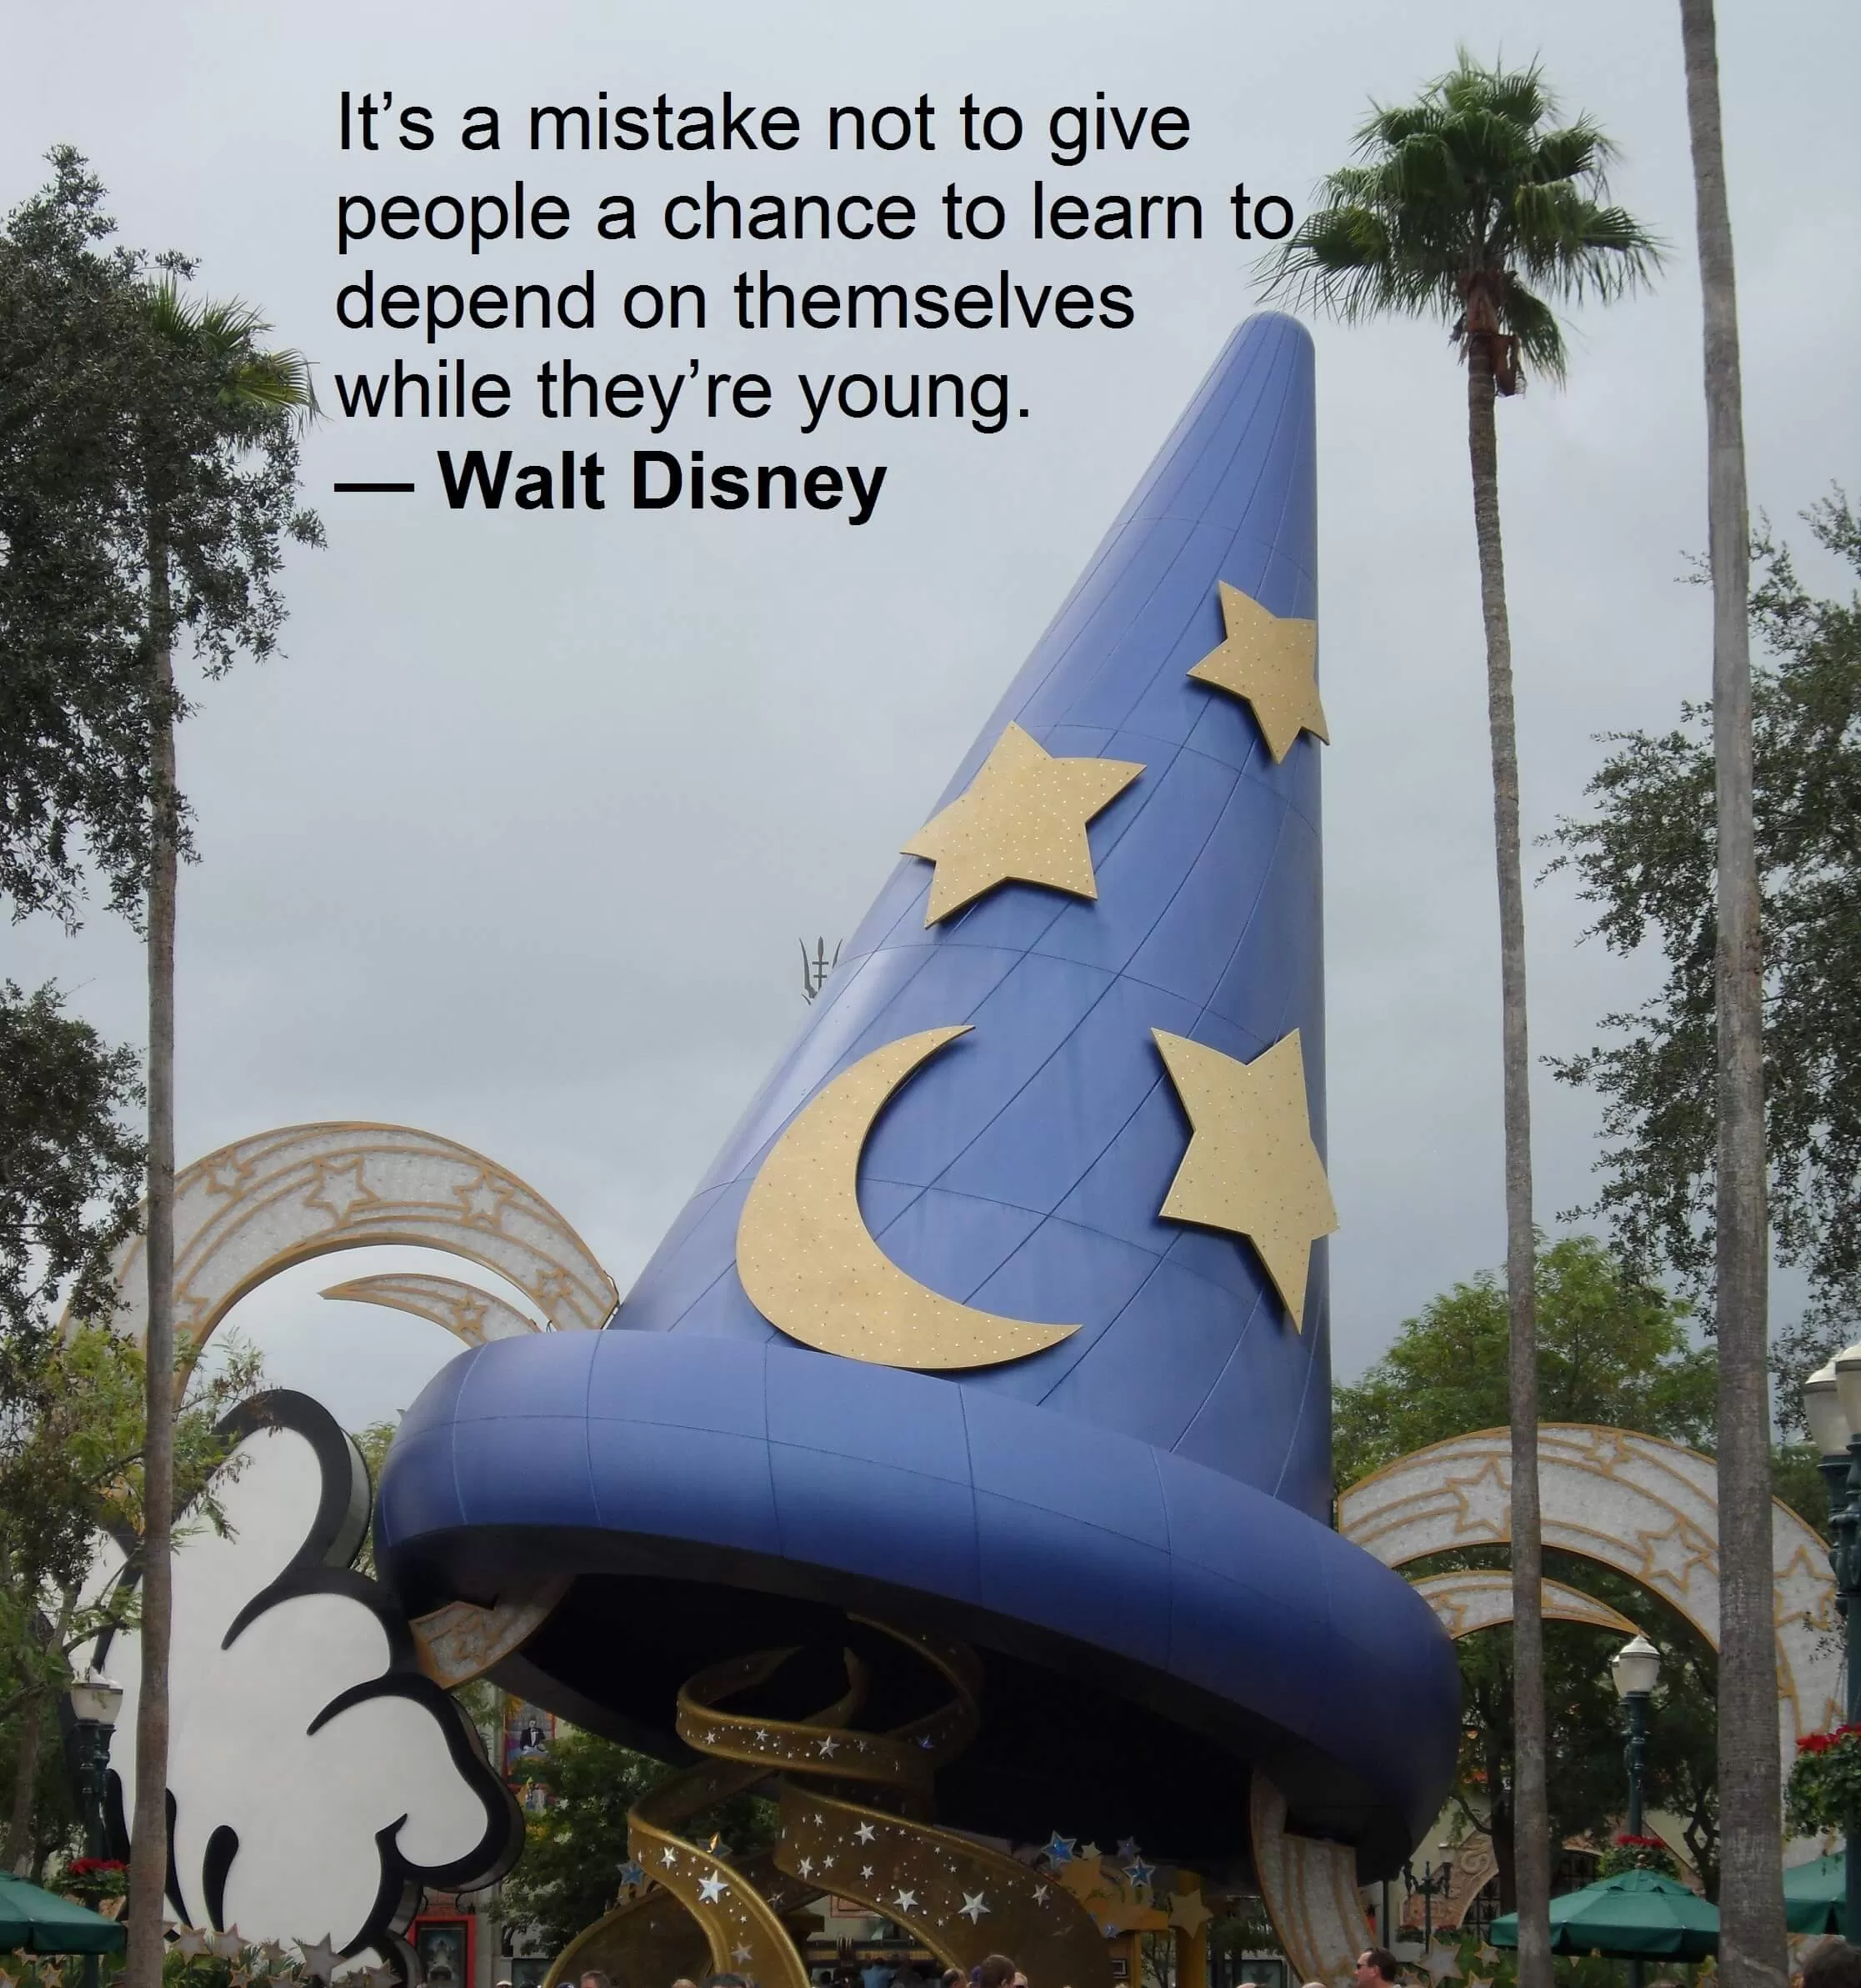 It’s a mistake not to give people a chance to learn to depend on themselves while they’re young. — Walt Disney